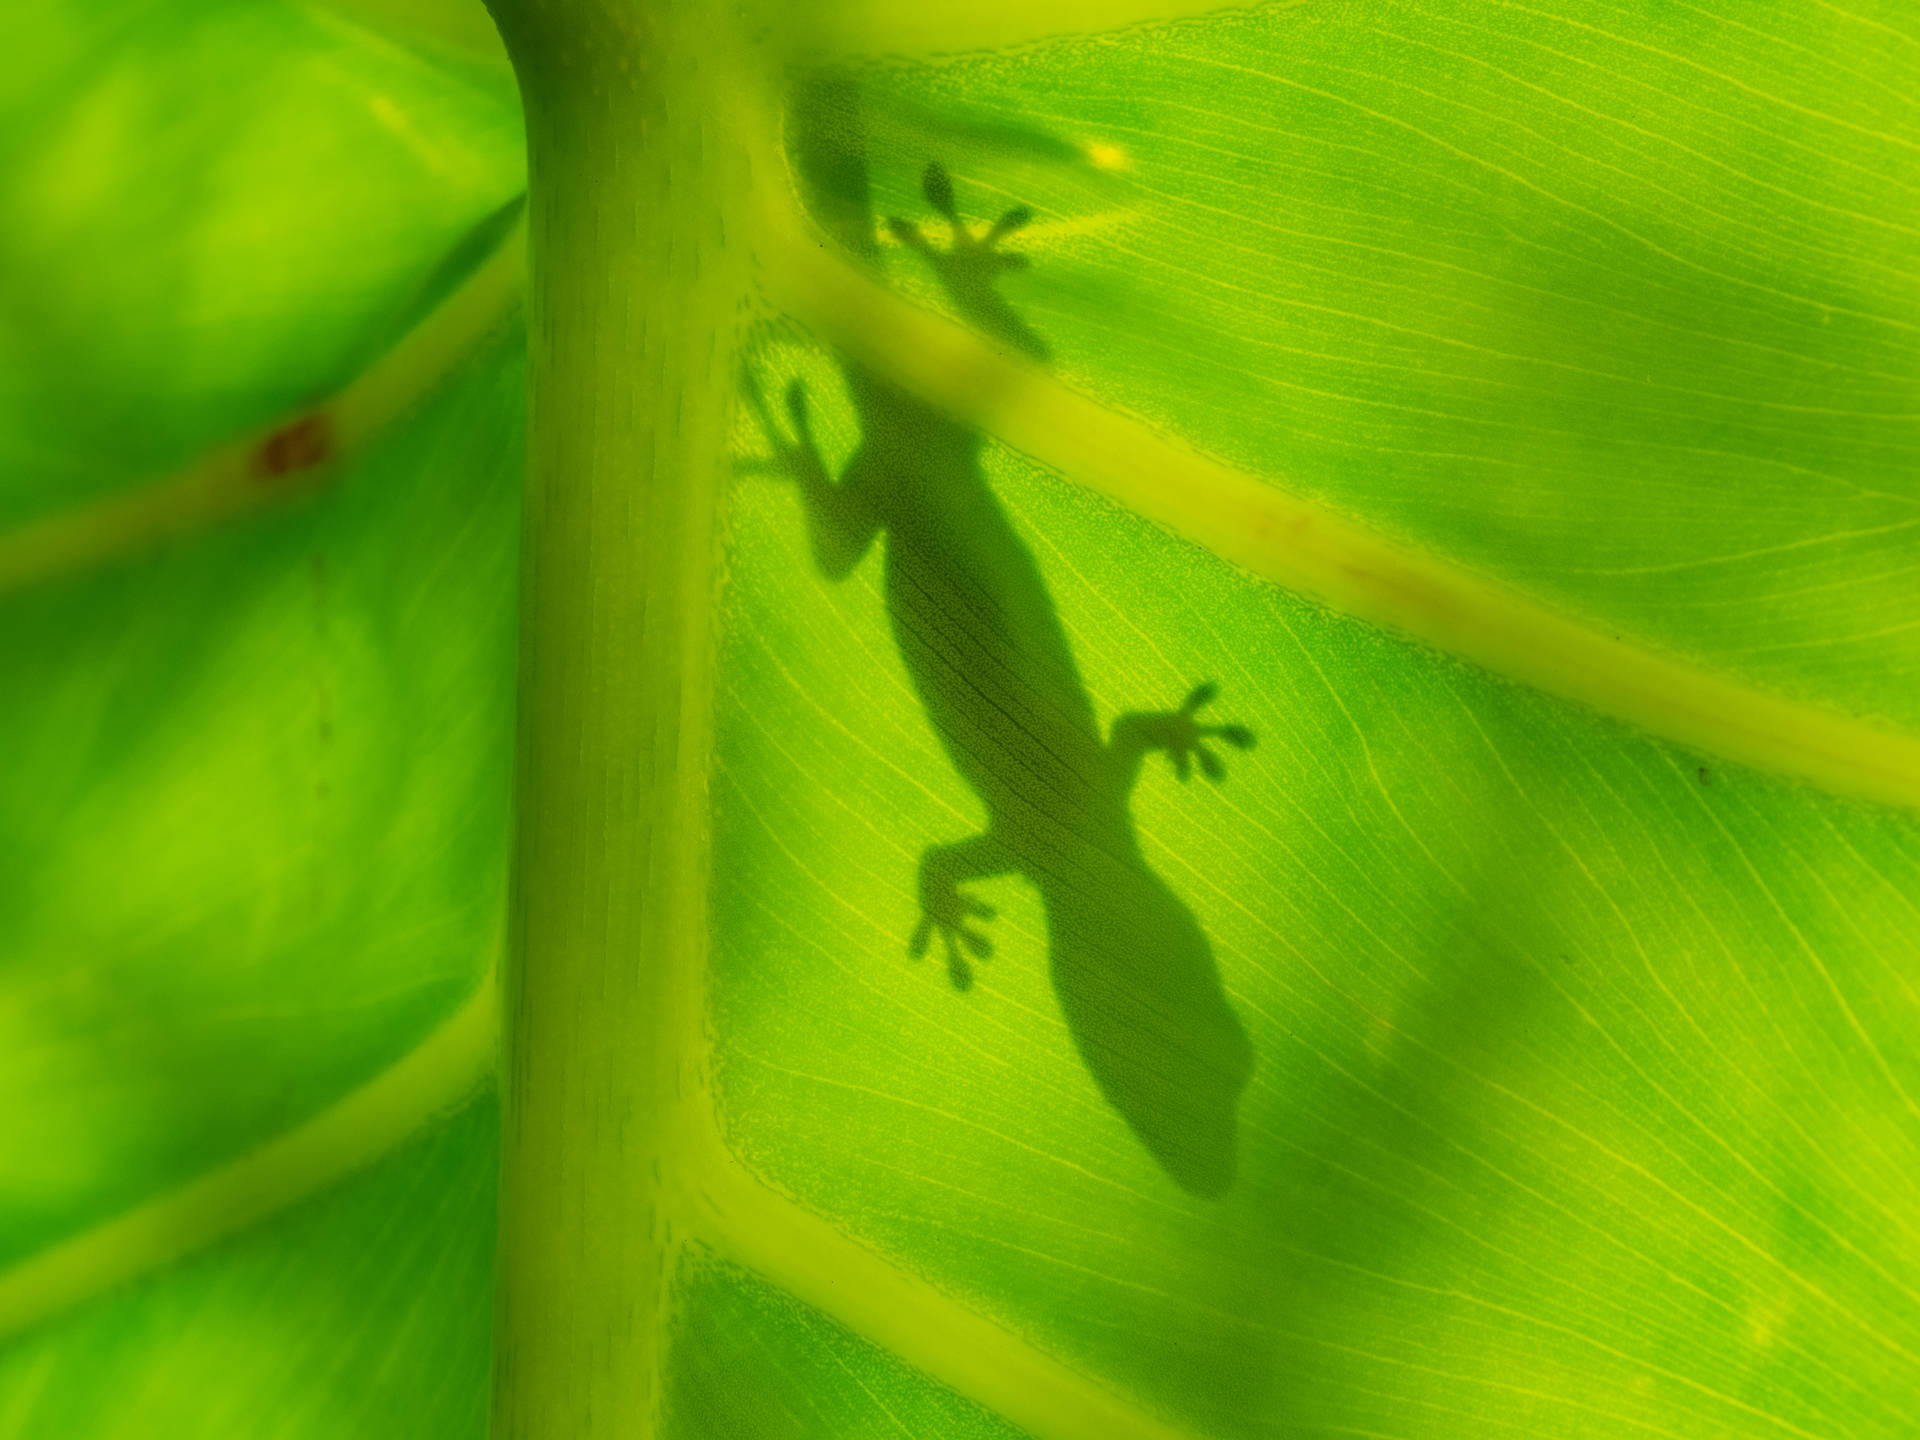 A Colorful Lizard On An Ombre Leaf Background